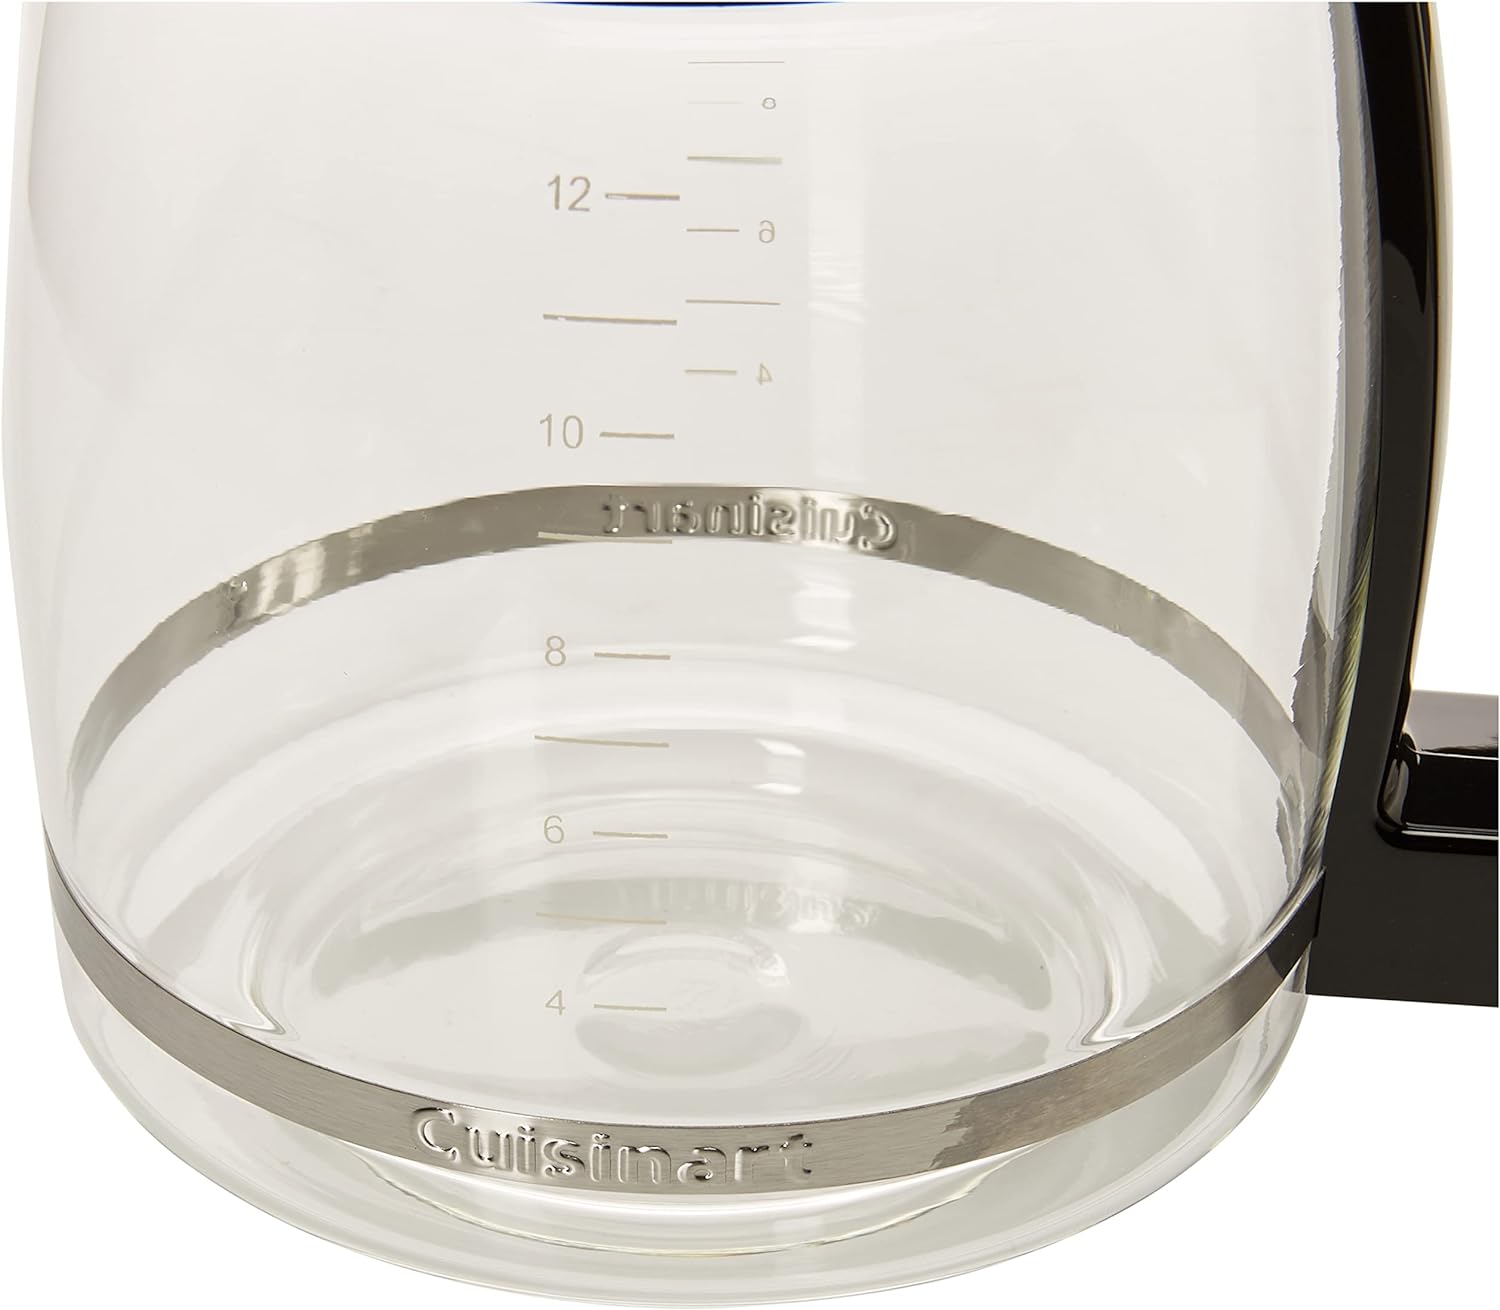 Cuisinart DCC-1200PRC 12-Cup Replacement Glass Carafe